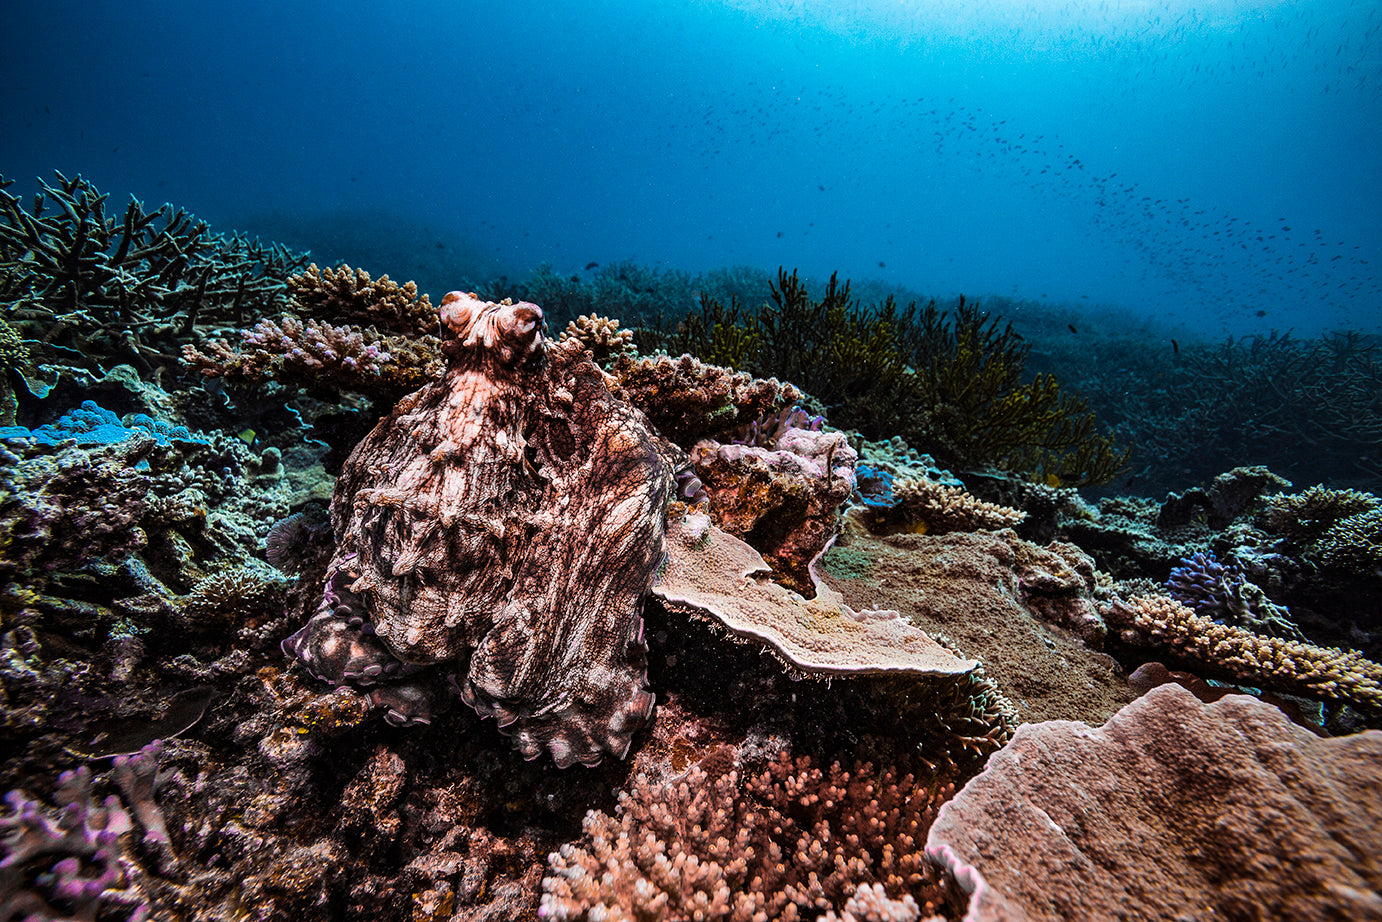 field of reef with a large coral formation with schools of fish to the background